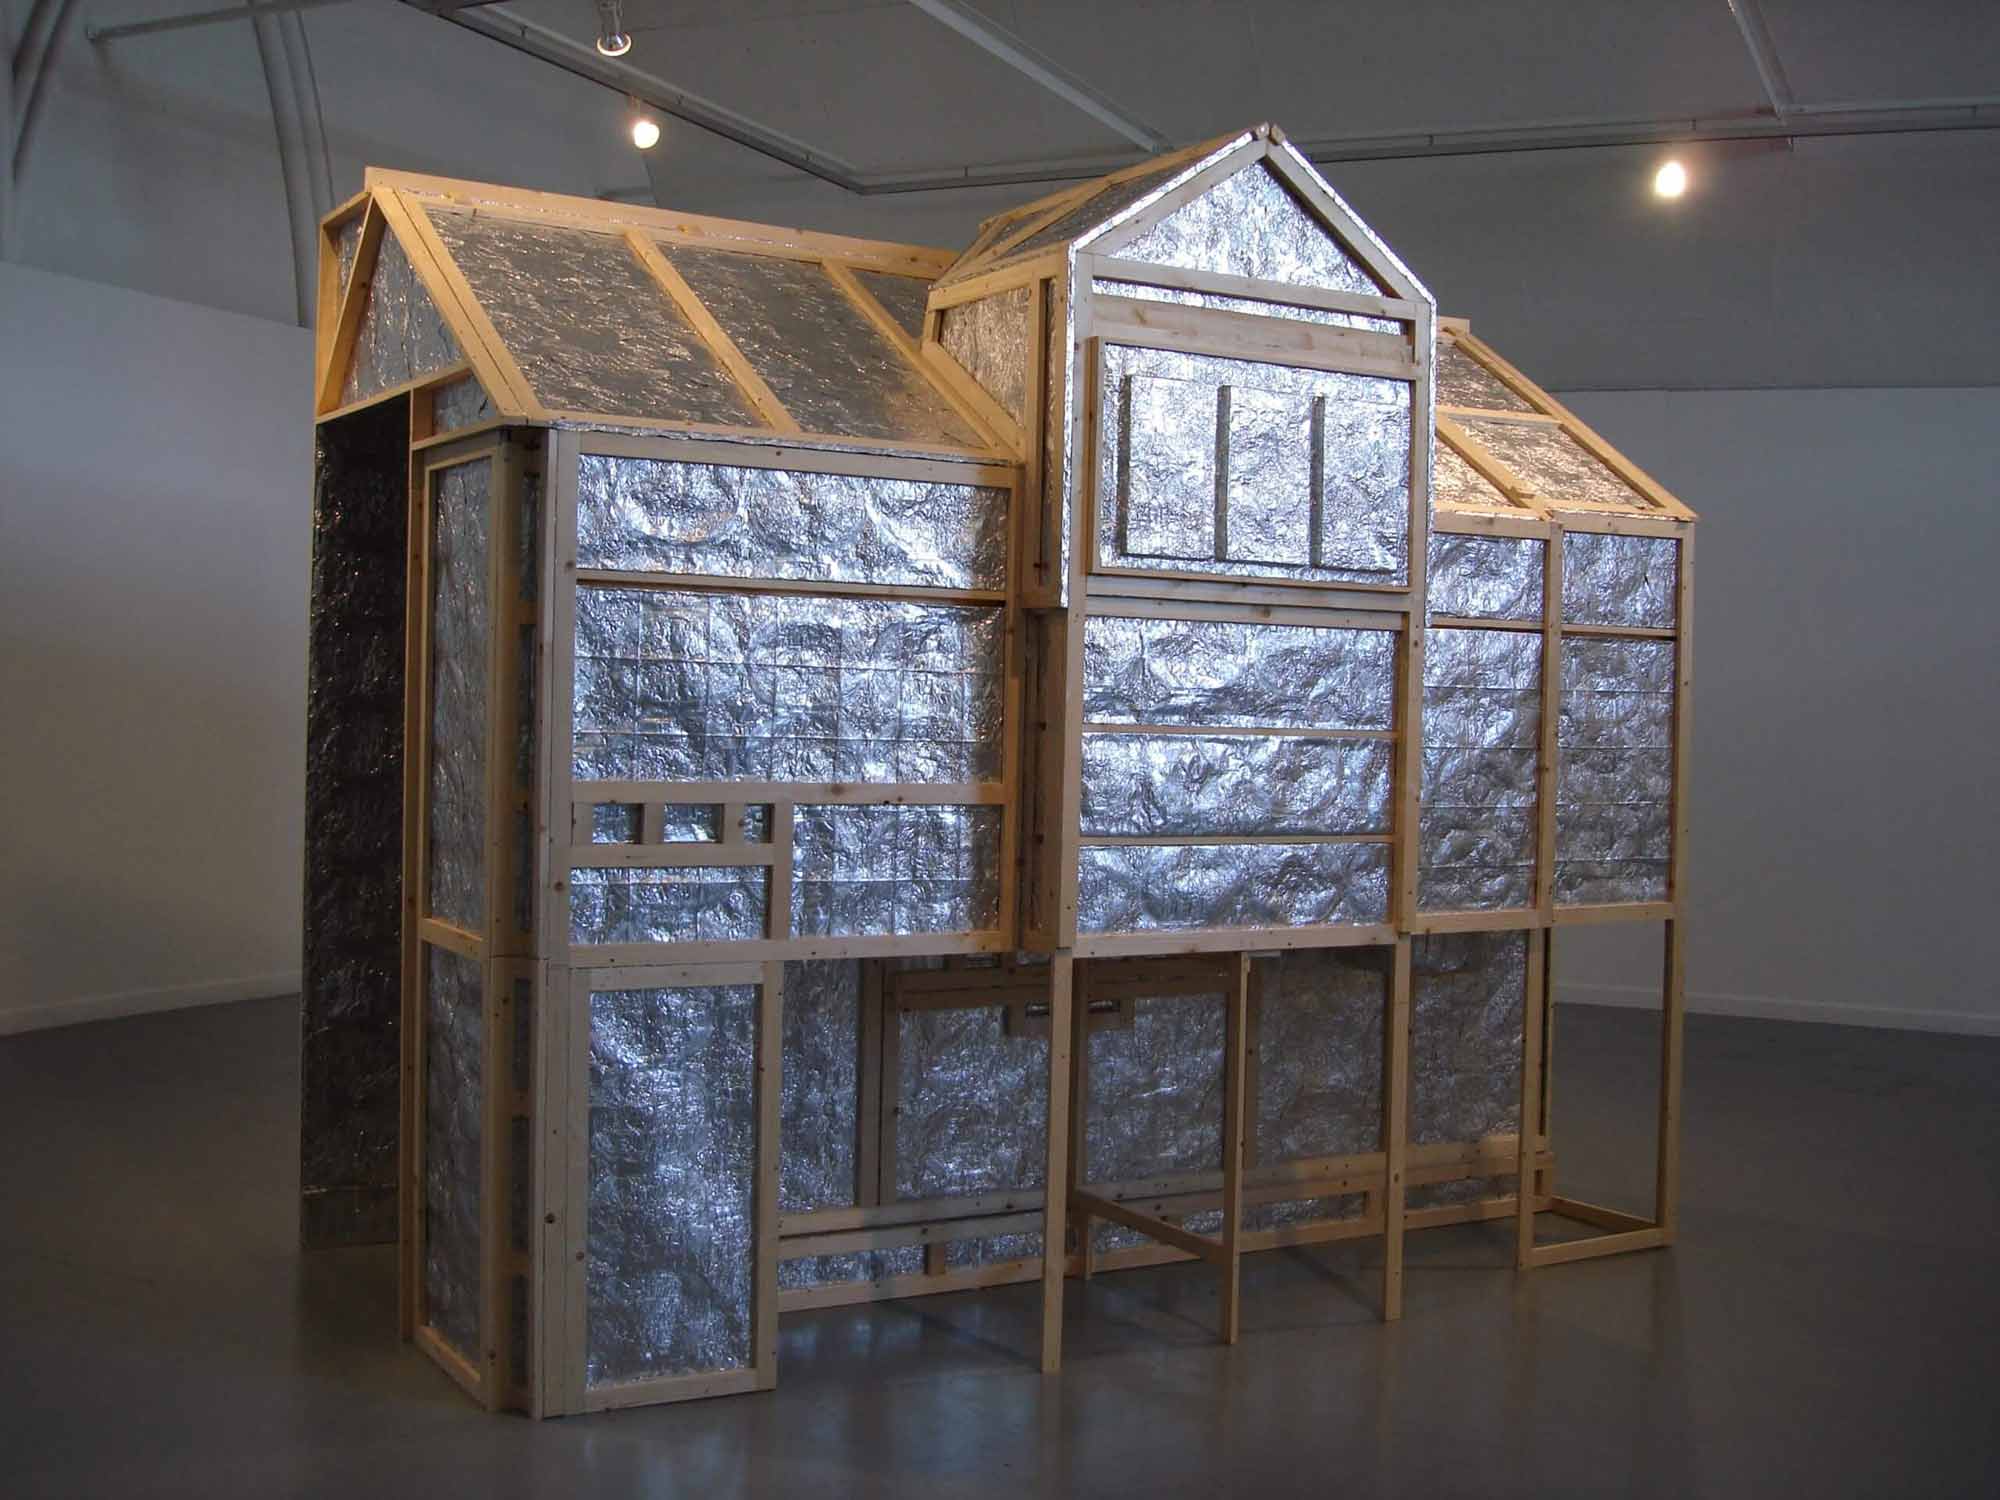 Interior photograph of an installation structure made of wood and silver foil.